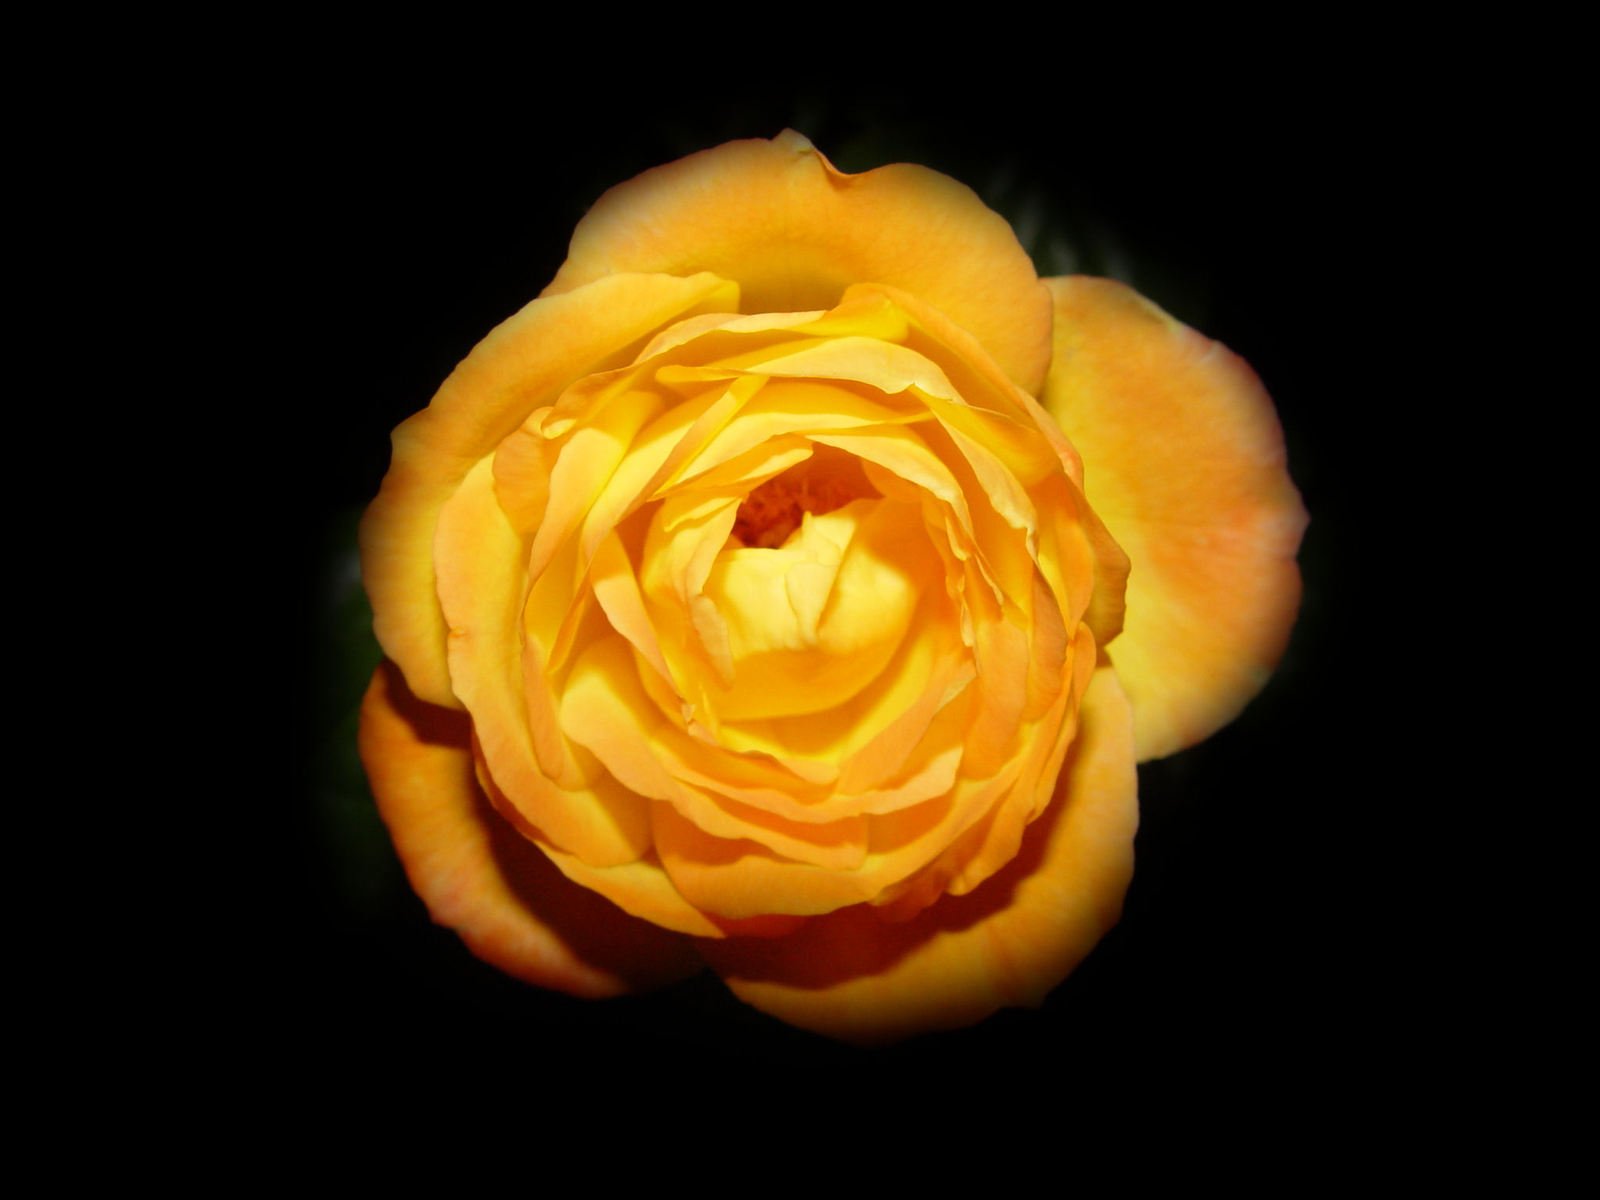 the rose is in the center of the po, yellow